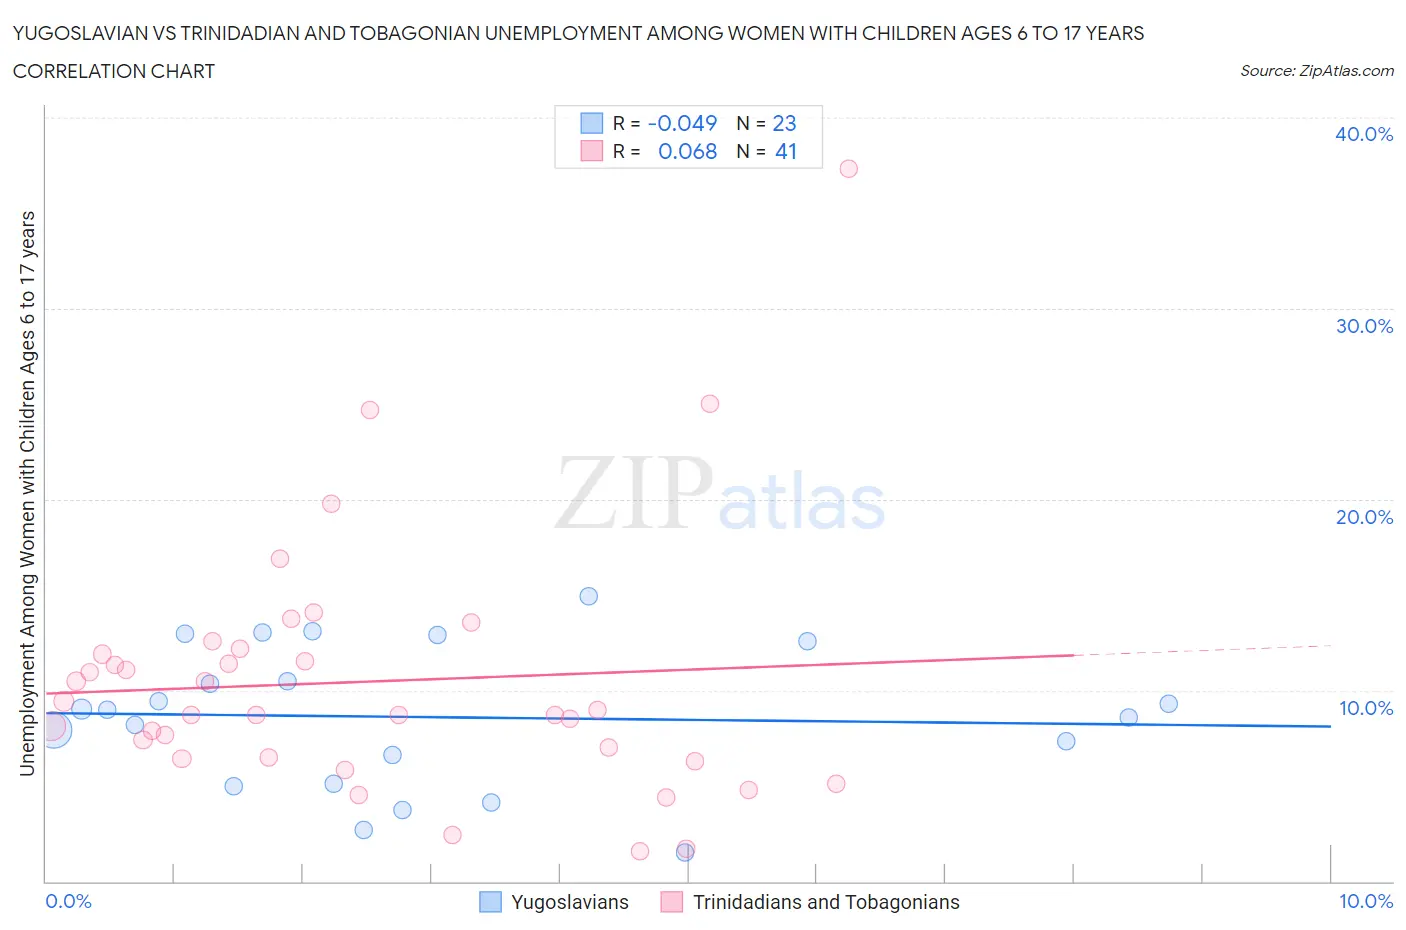 Yugoslavian vs Trinidadian and Tobagonian Unemployment Among Women with Children Ages 6 to 17 years